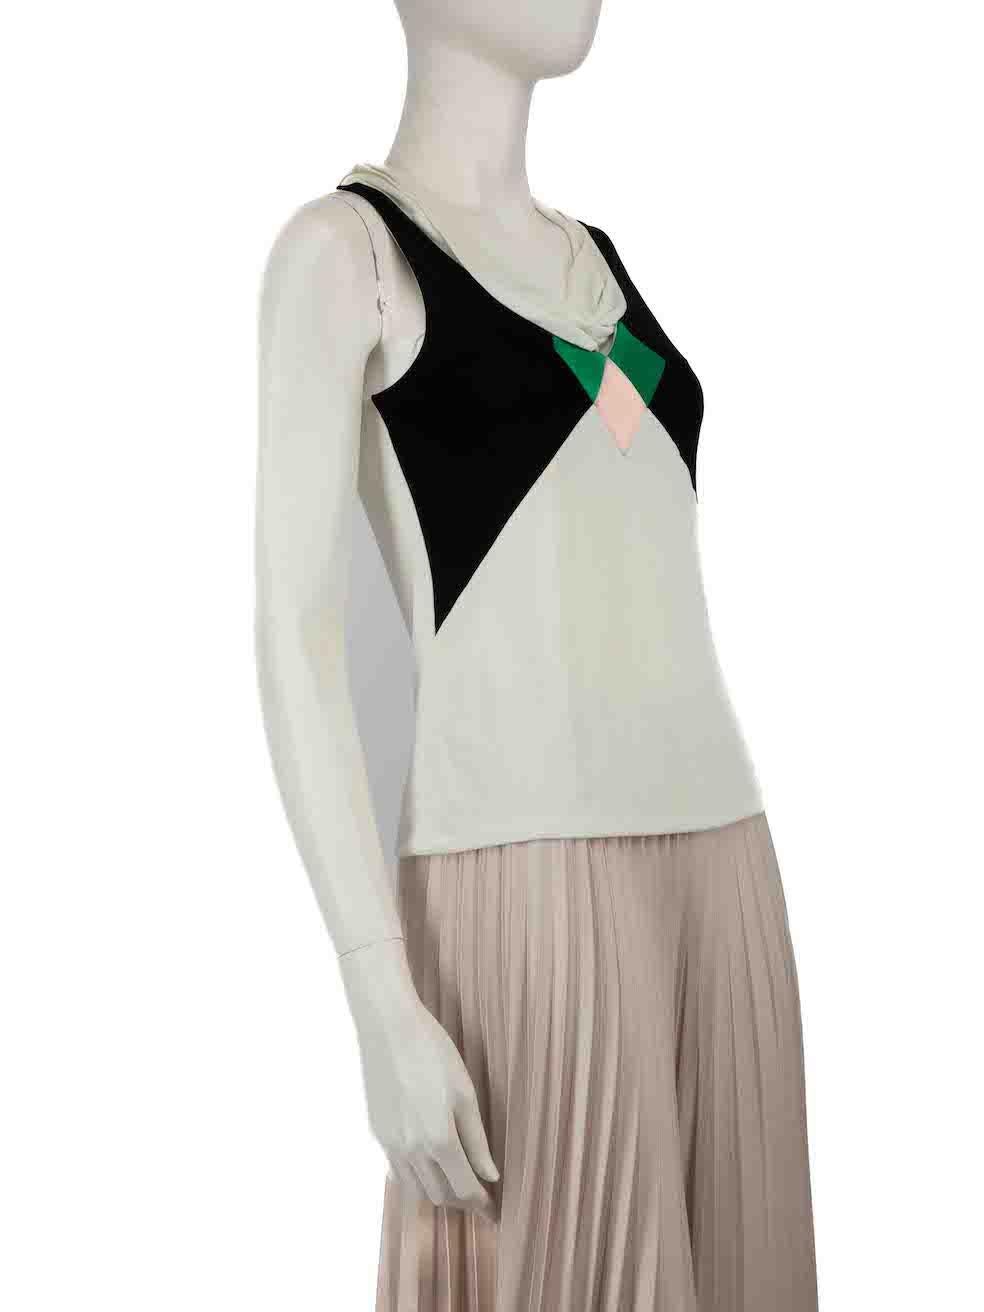 CONDITION is Good. General wear to top is evident. Moderate signs of wear to the front and the underarms with discoloured marks on this used Gucci designer resale item.
 
 
 
 Details
 
 
 White
 
 Viscose
 
 Top
 
 Black, green and blue panelled